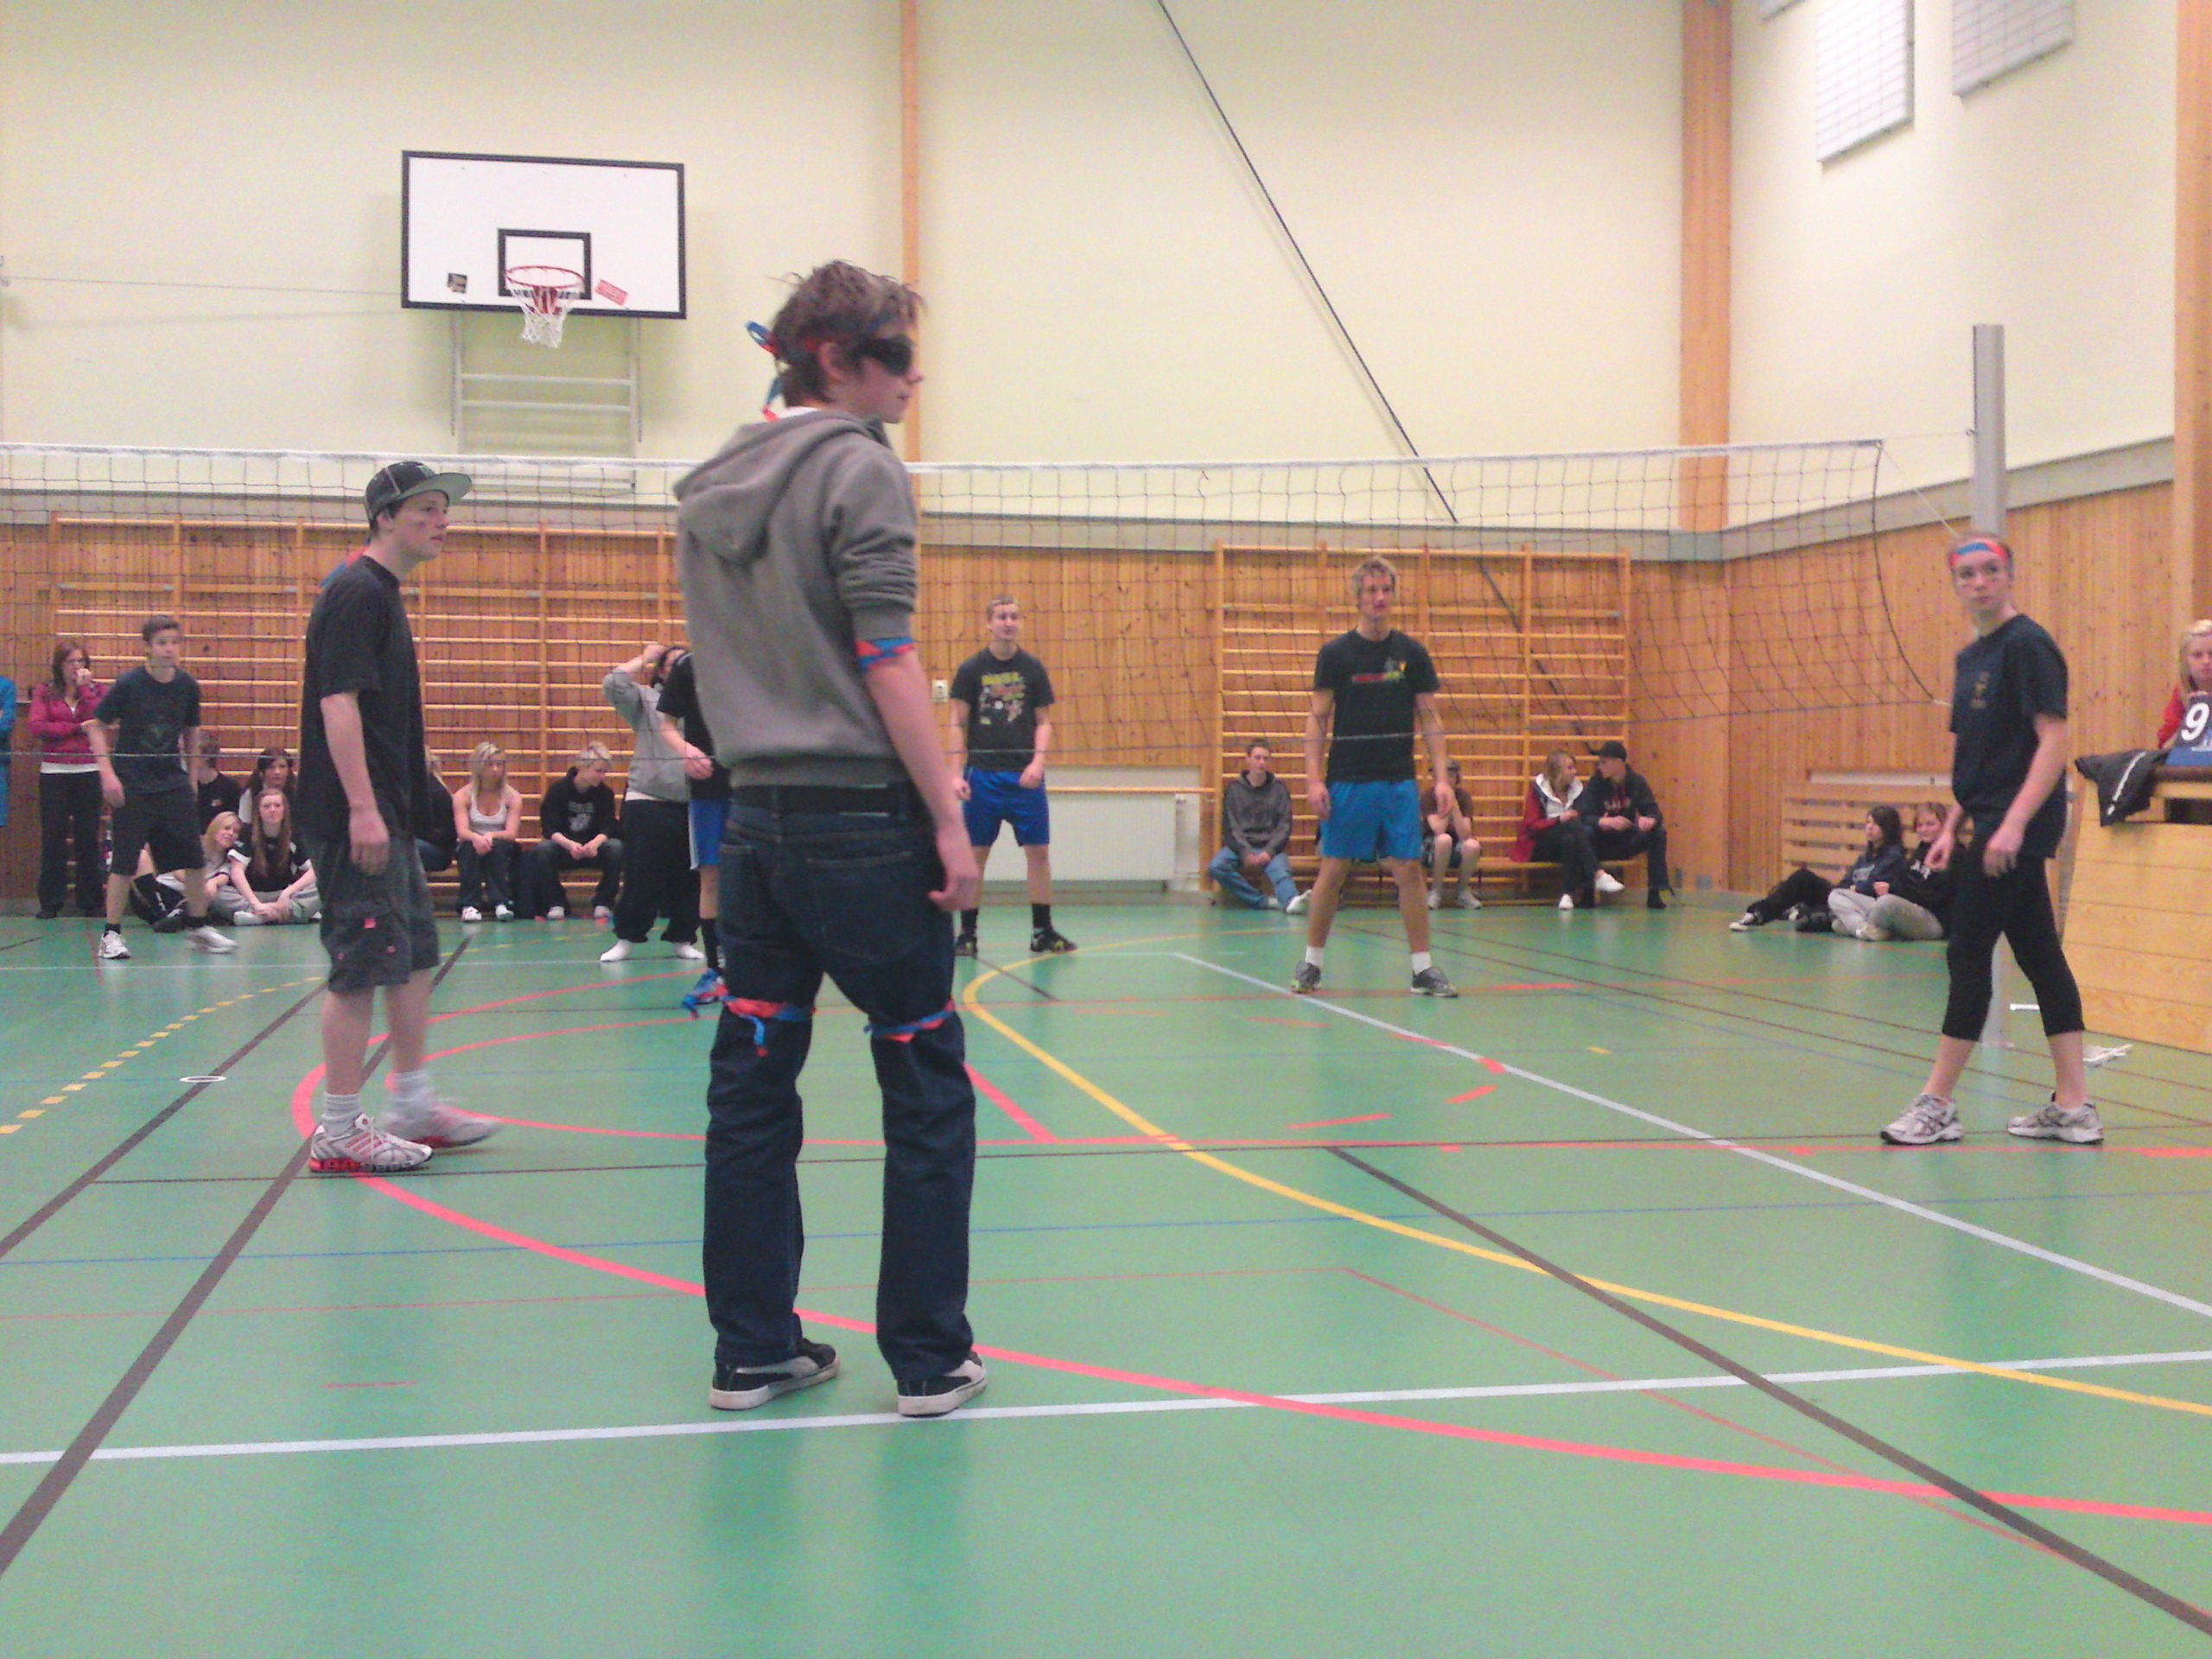 my class at a volleyball-tournament  in school